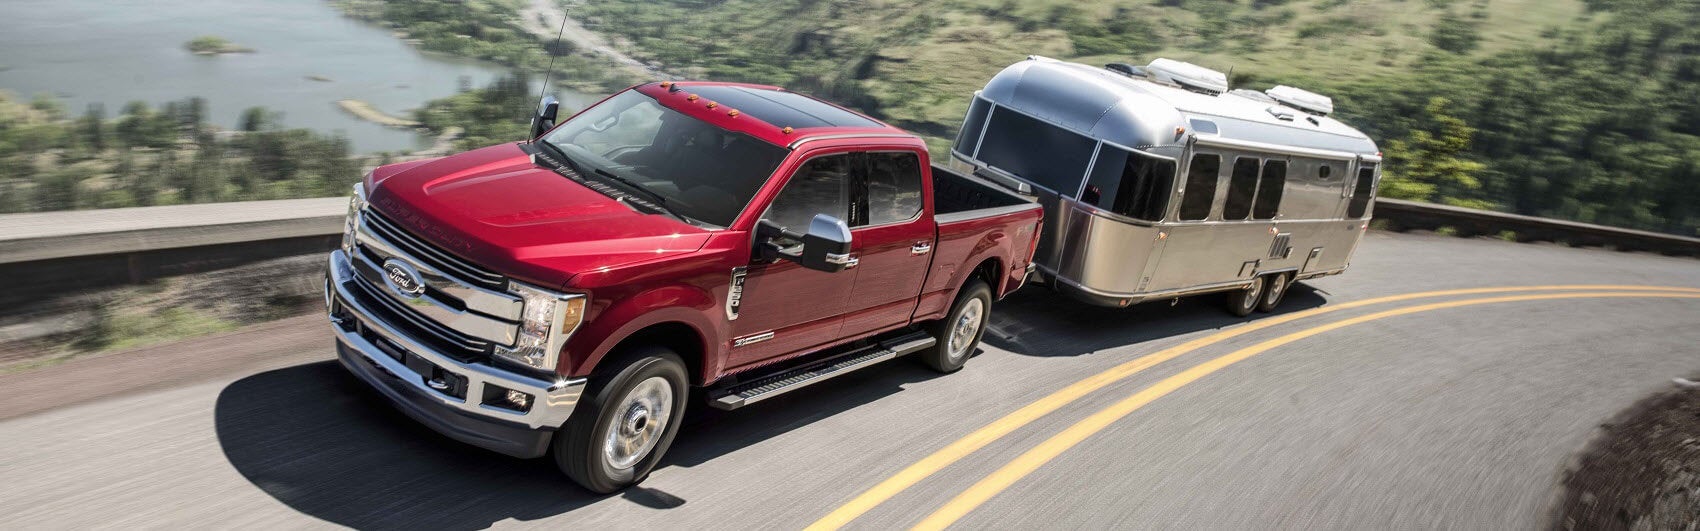 Ford F-250 Towing Power